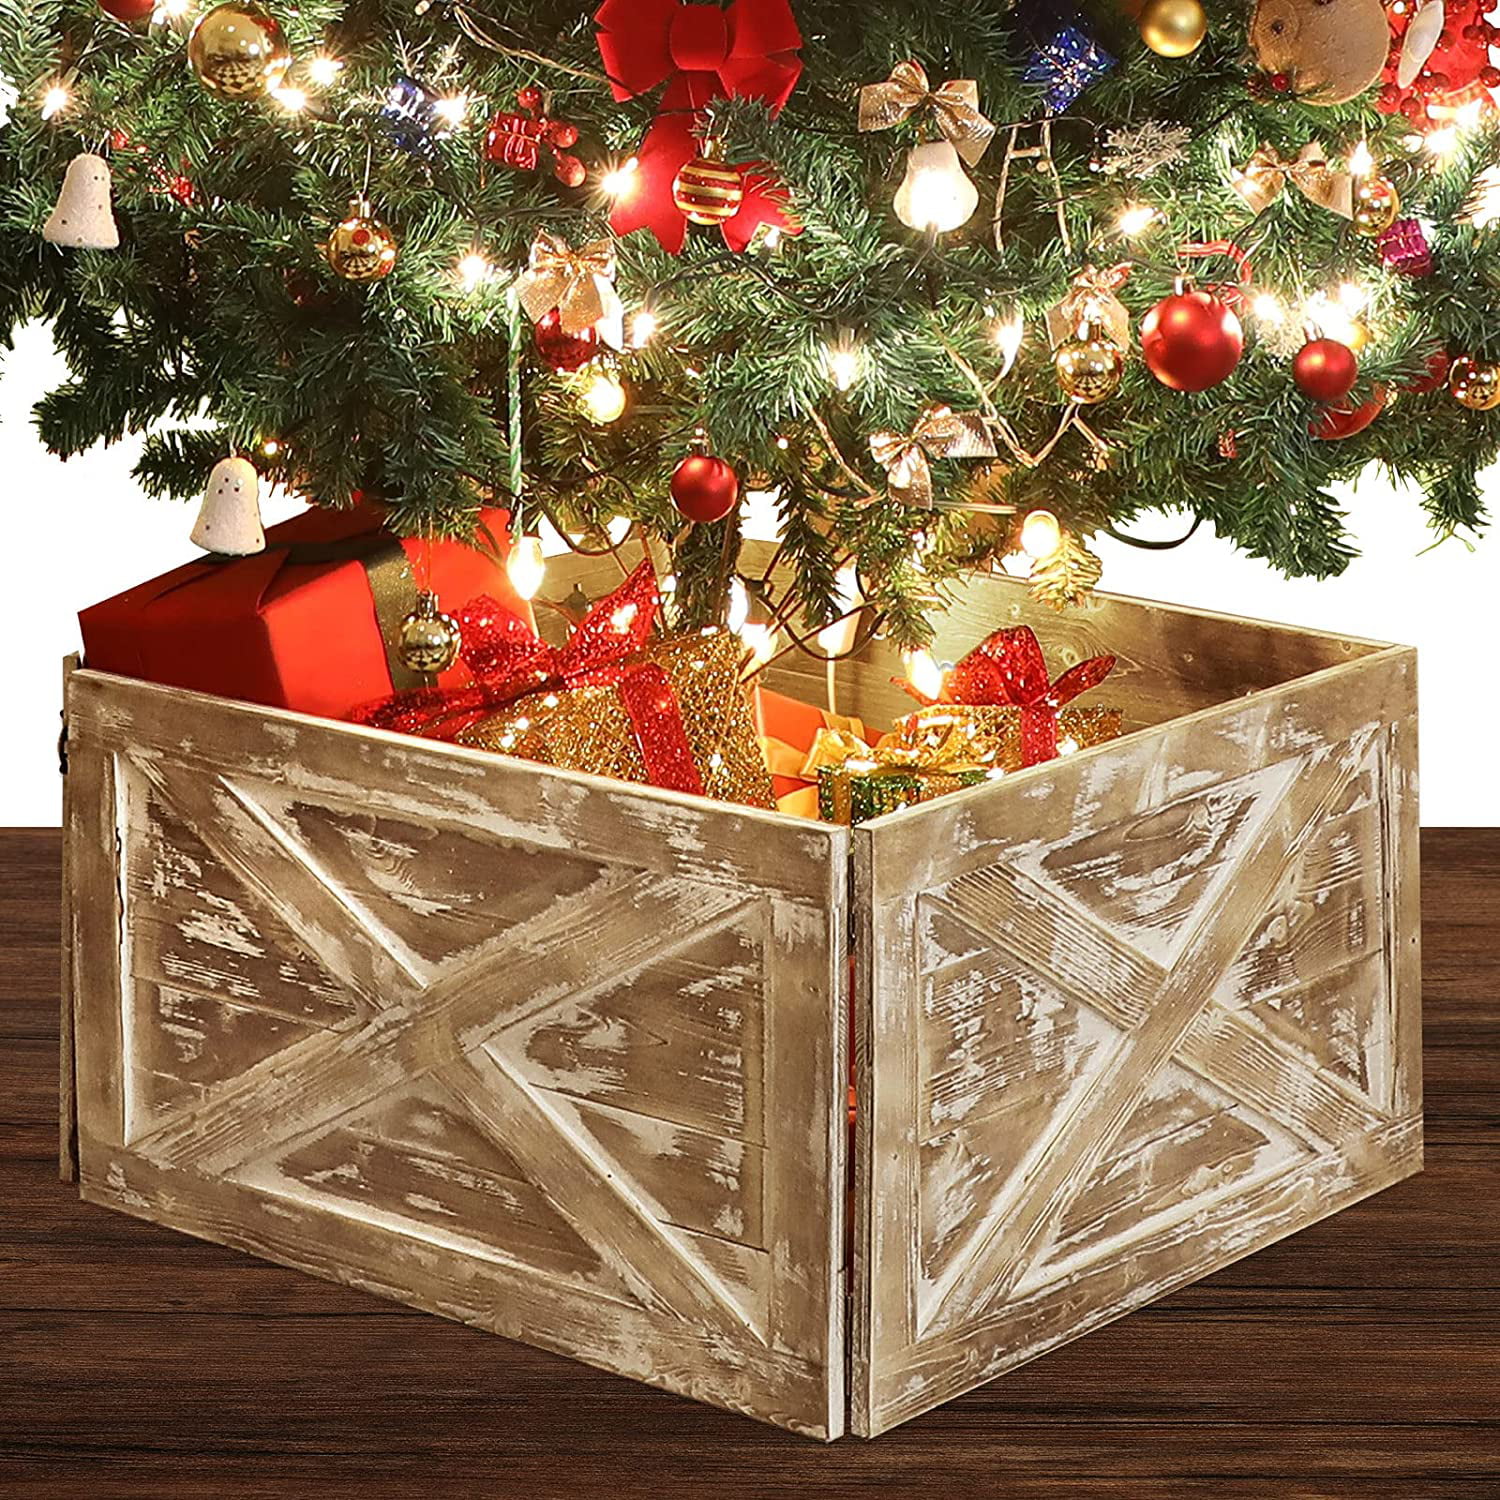 Details about   Extra Large Christmas Xmas Storage Zip Bags For Tree Decorations Lights Handles 